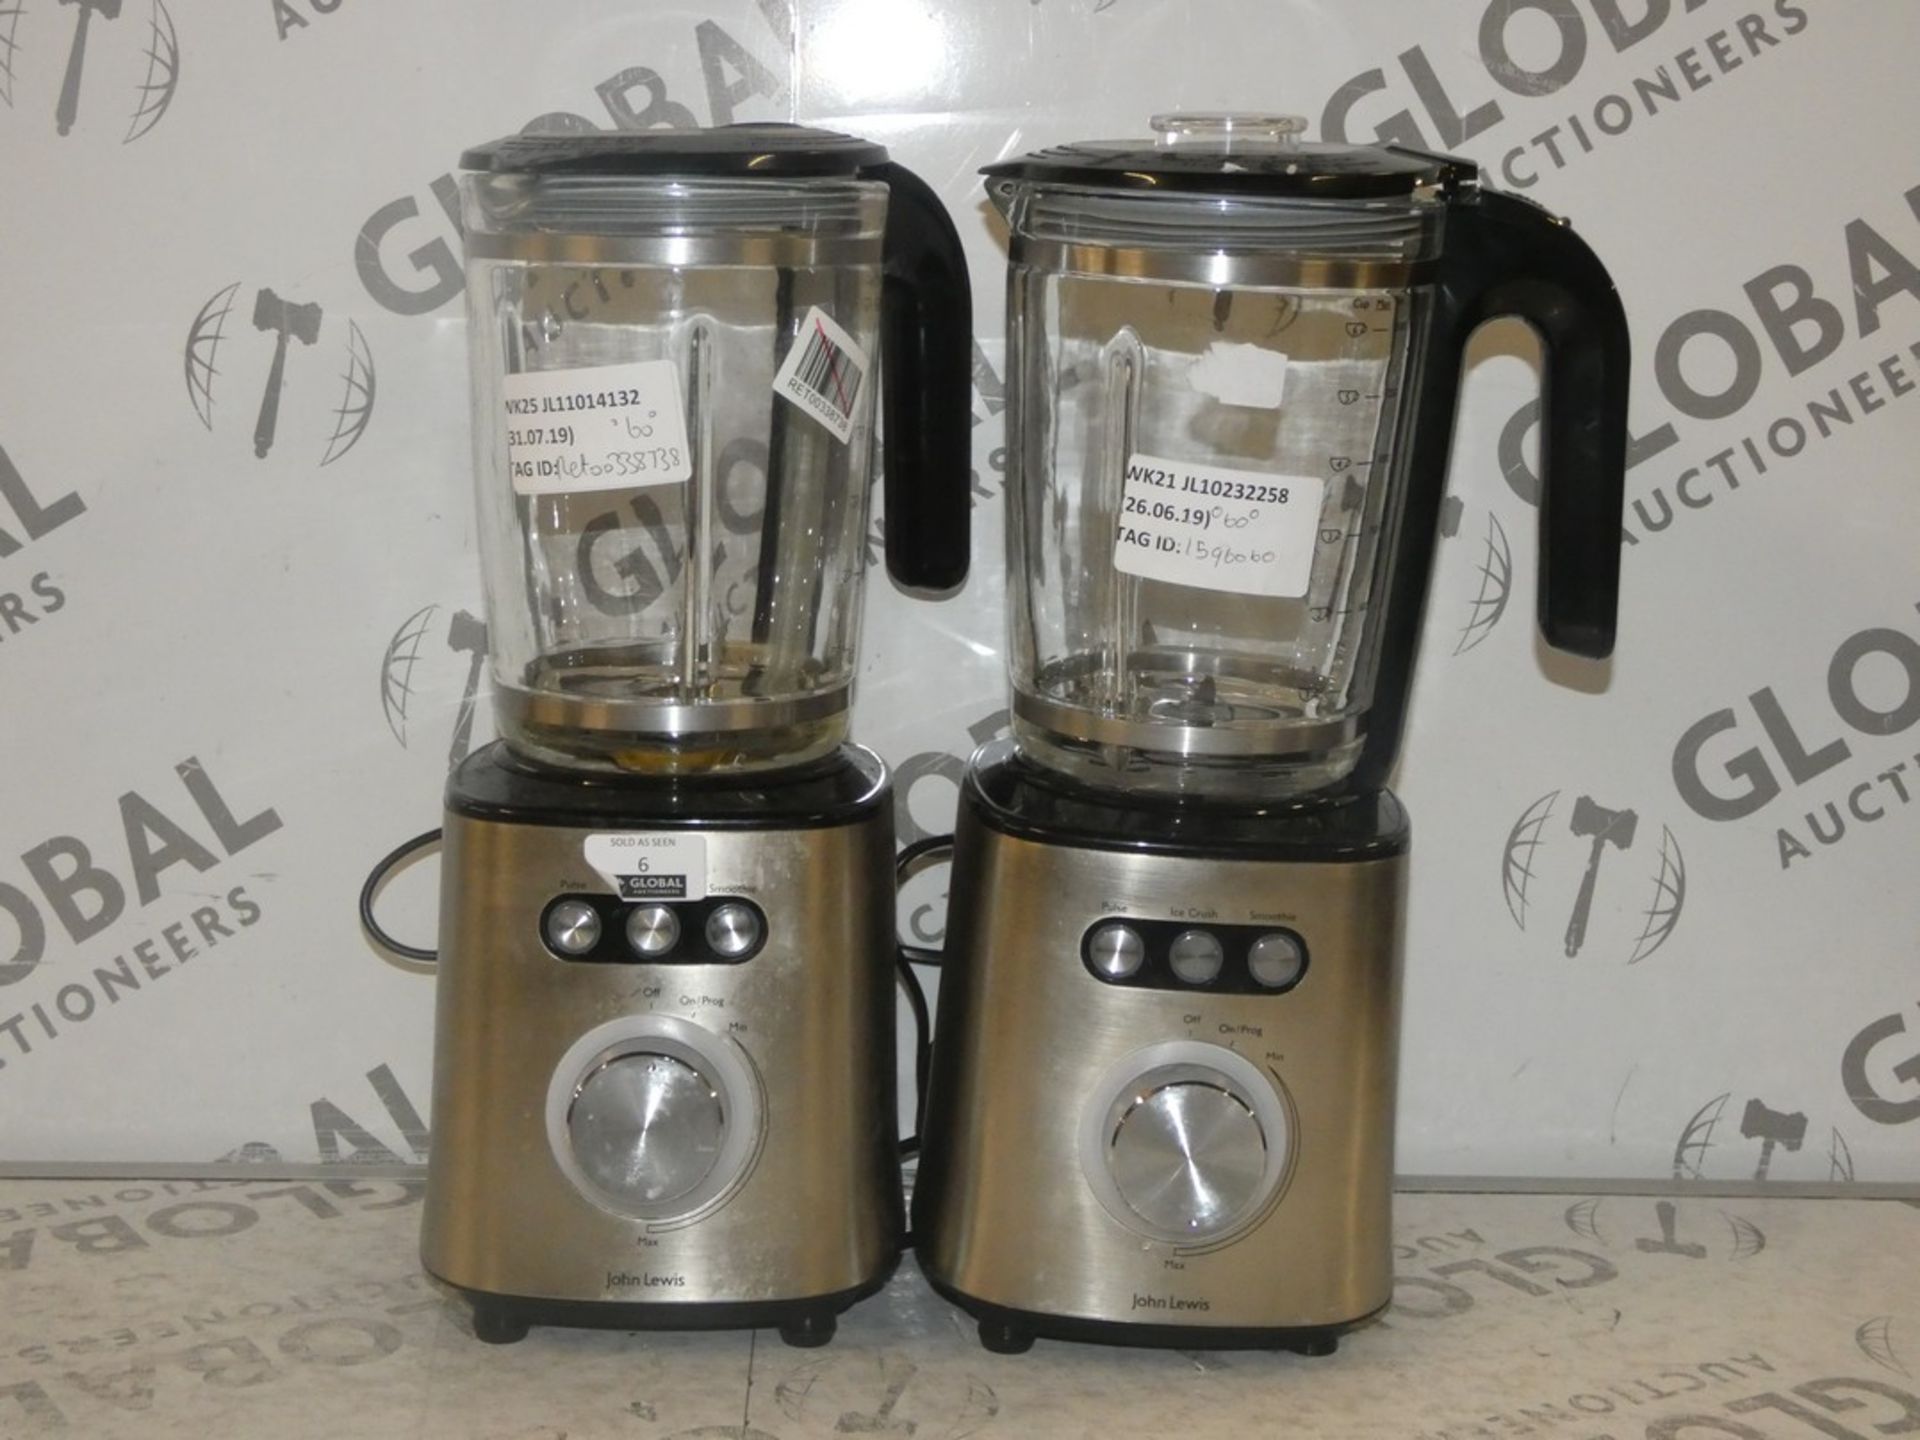 Lot To Contain 2 John Lewis Blenders Combined RRP£120.0 (RET00338738)(1596060)(10203258)(Viewings